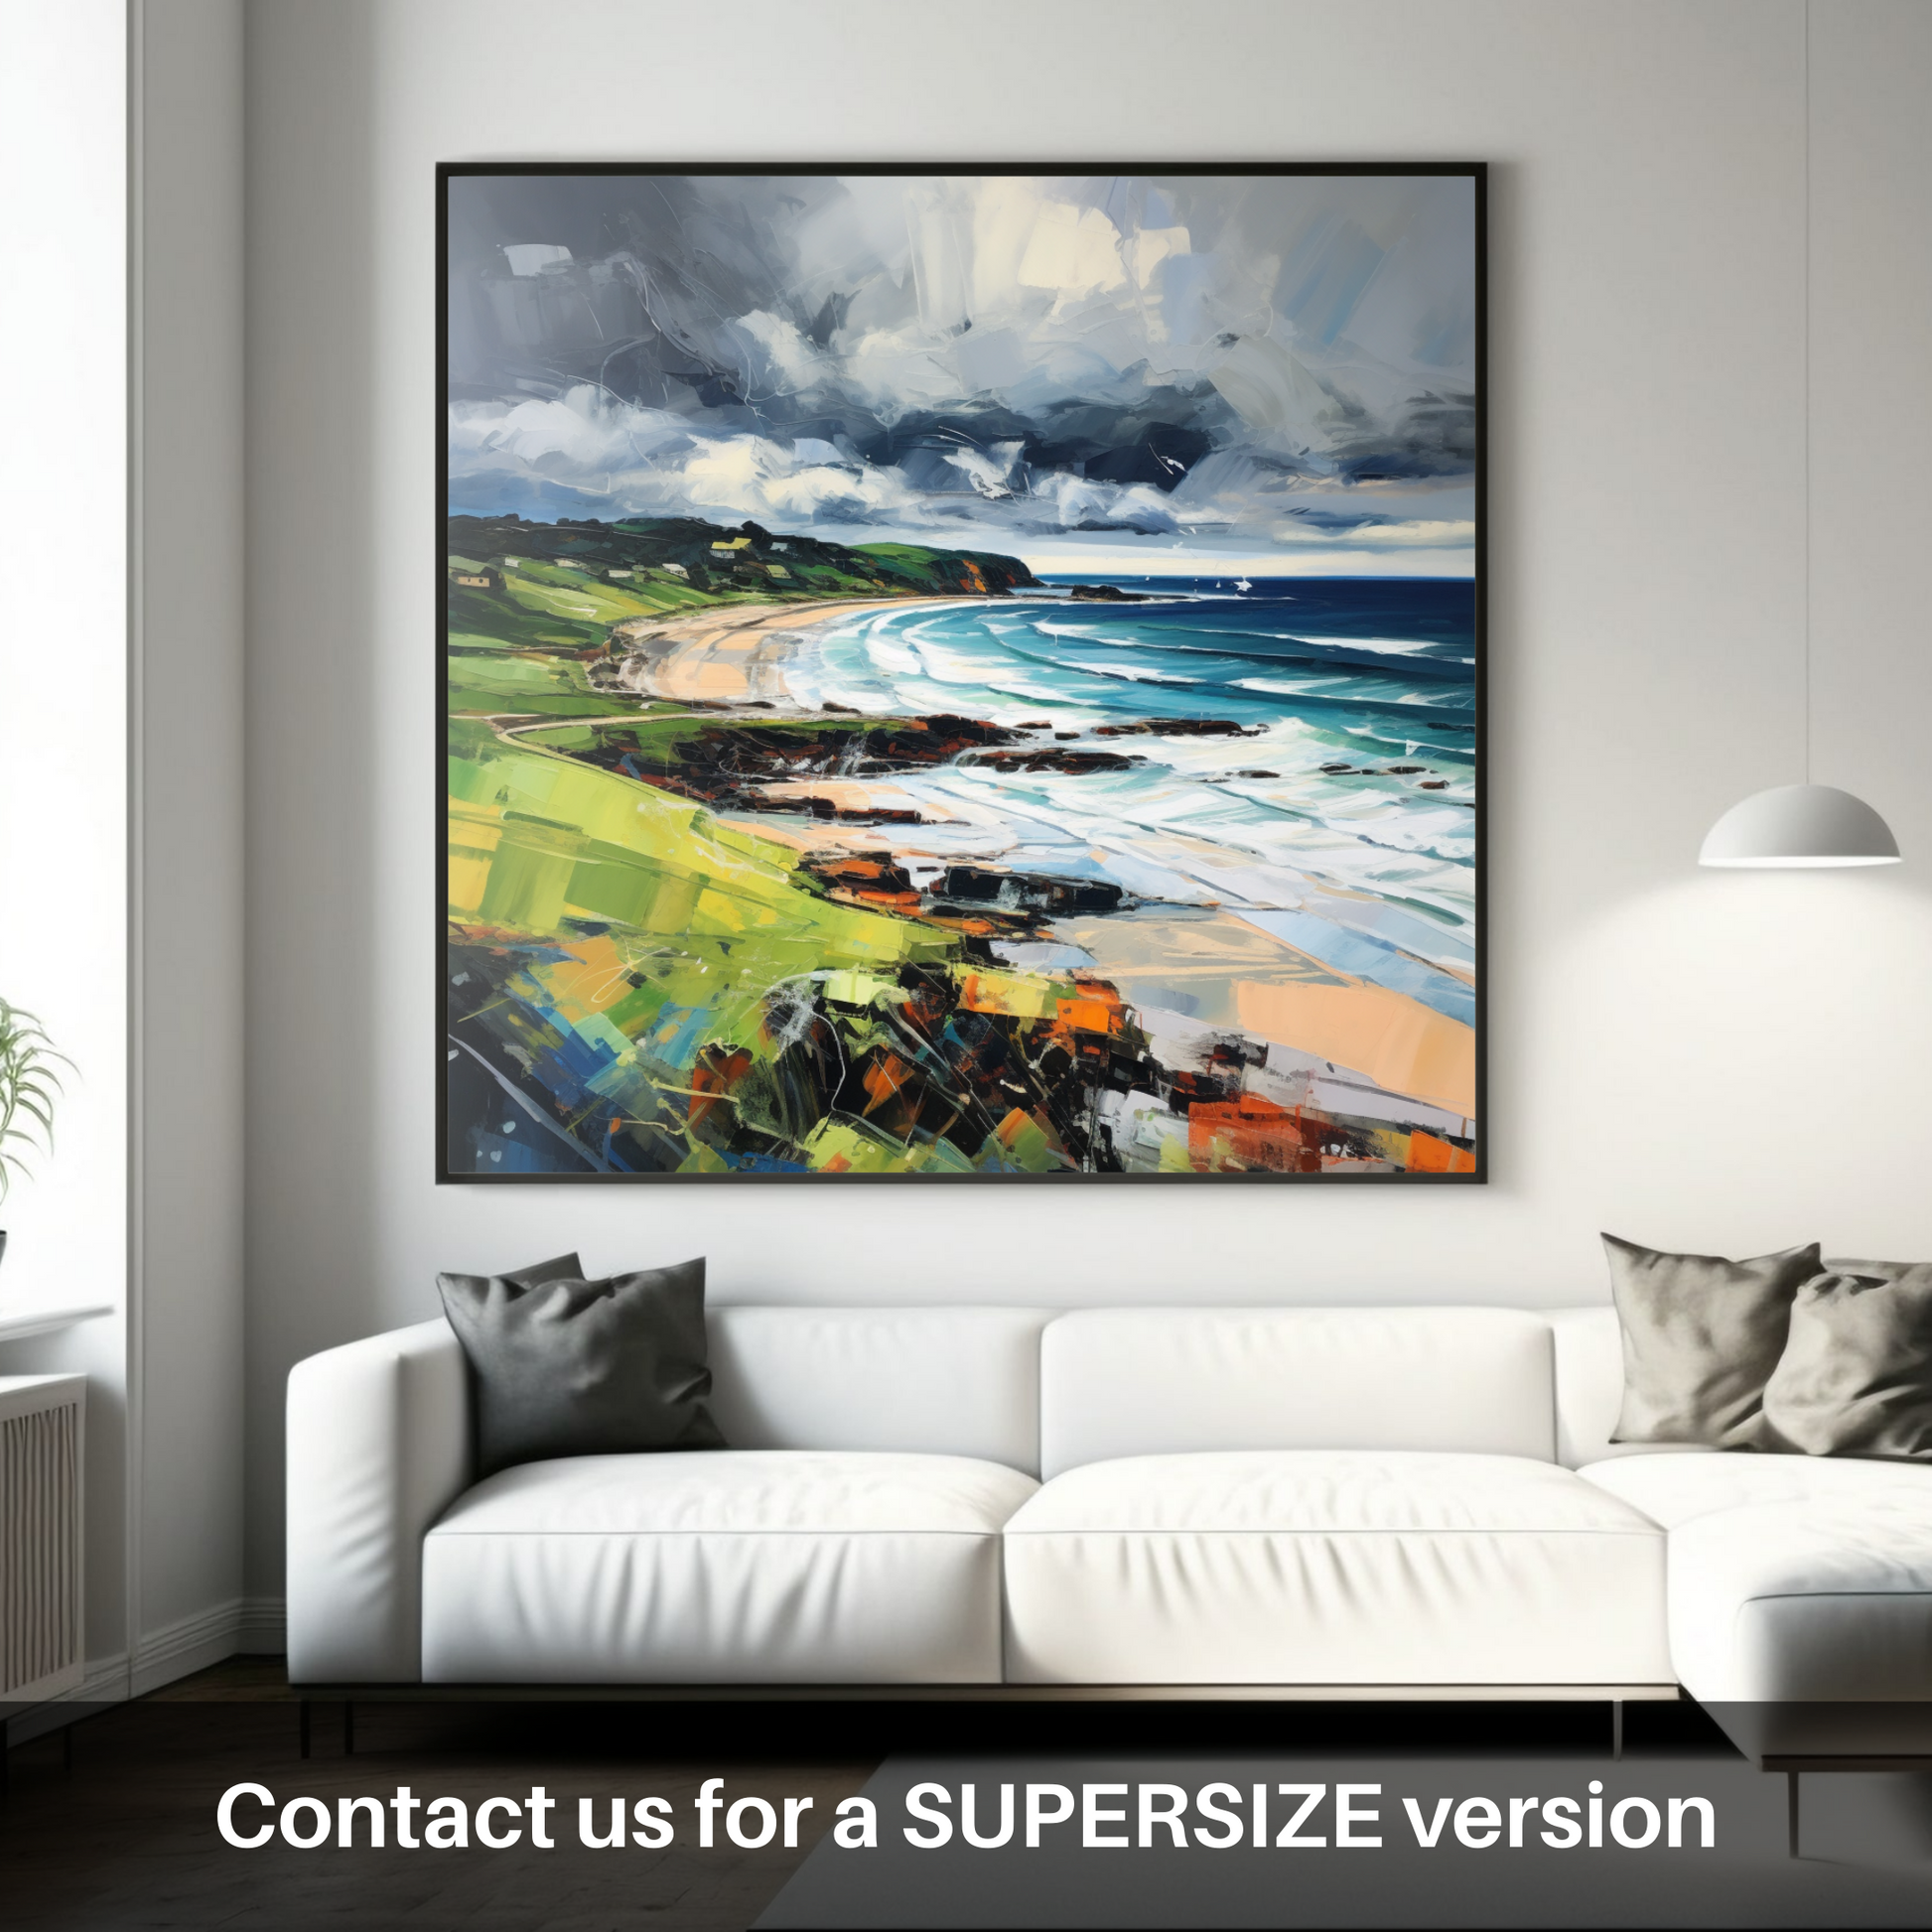 Huge supersize print of Coldingham Bay with a stormy sky